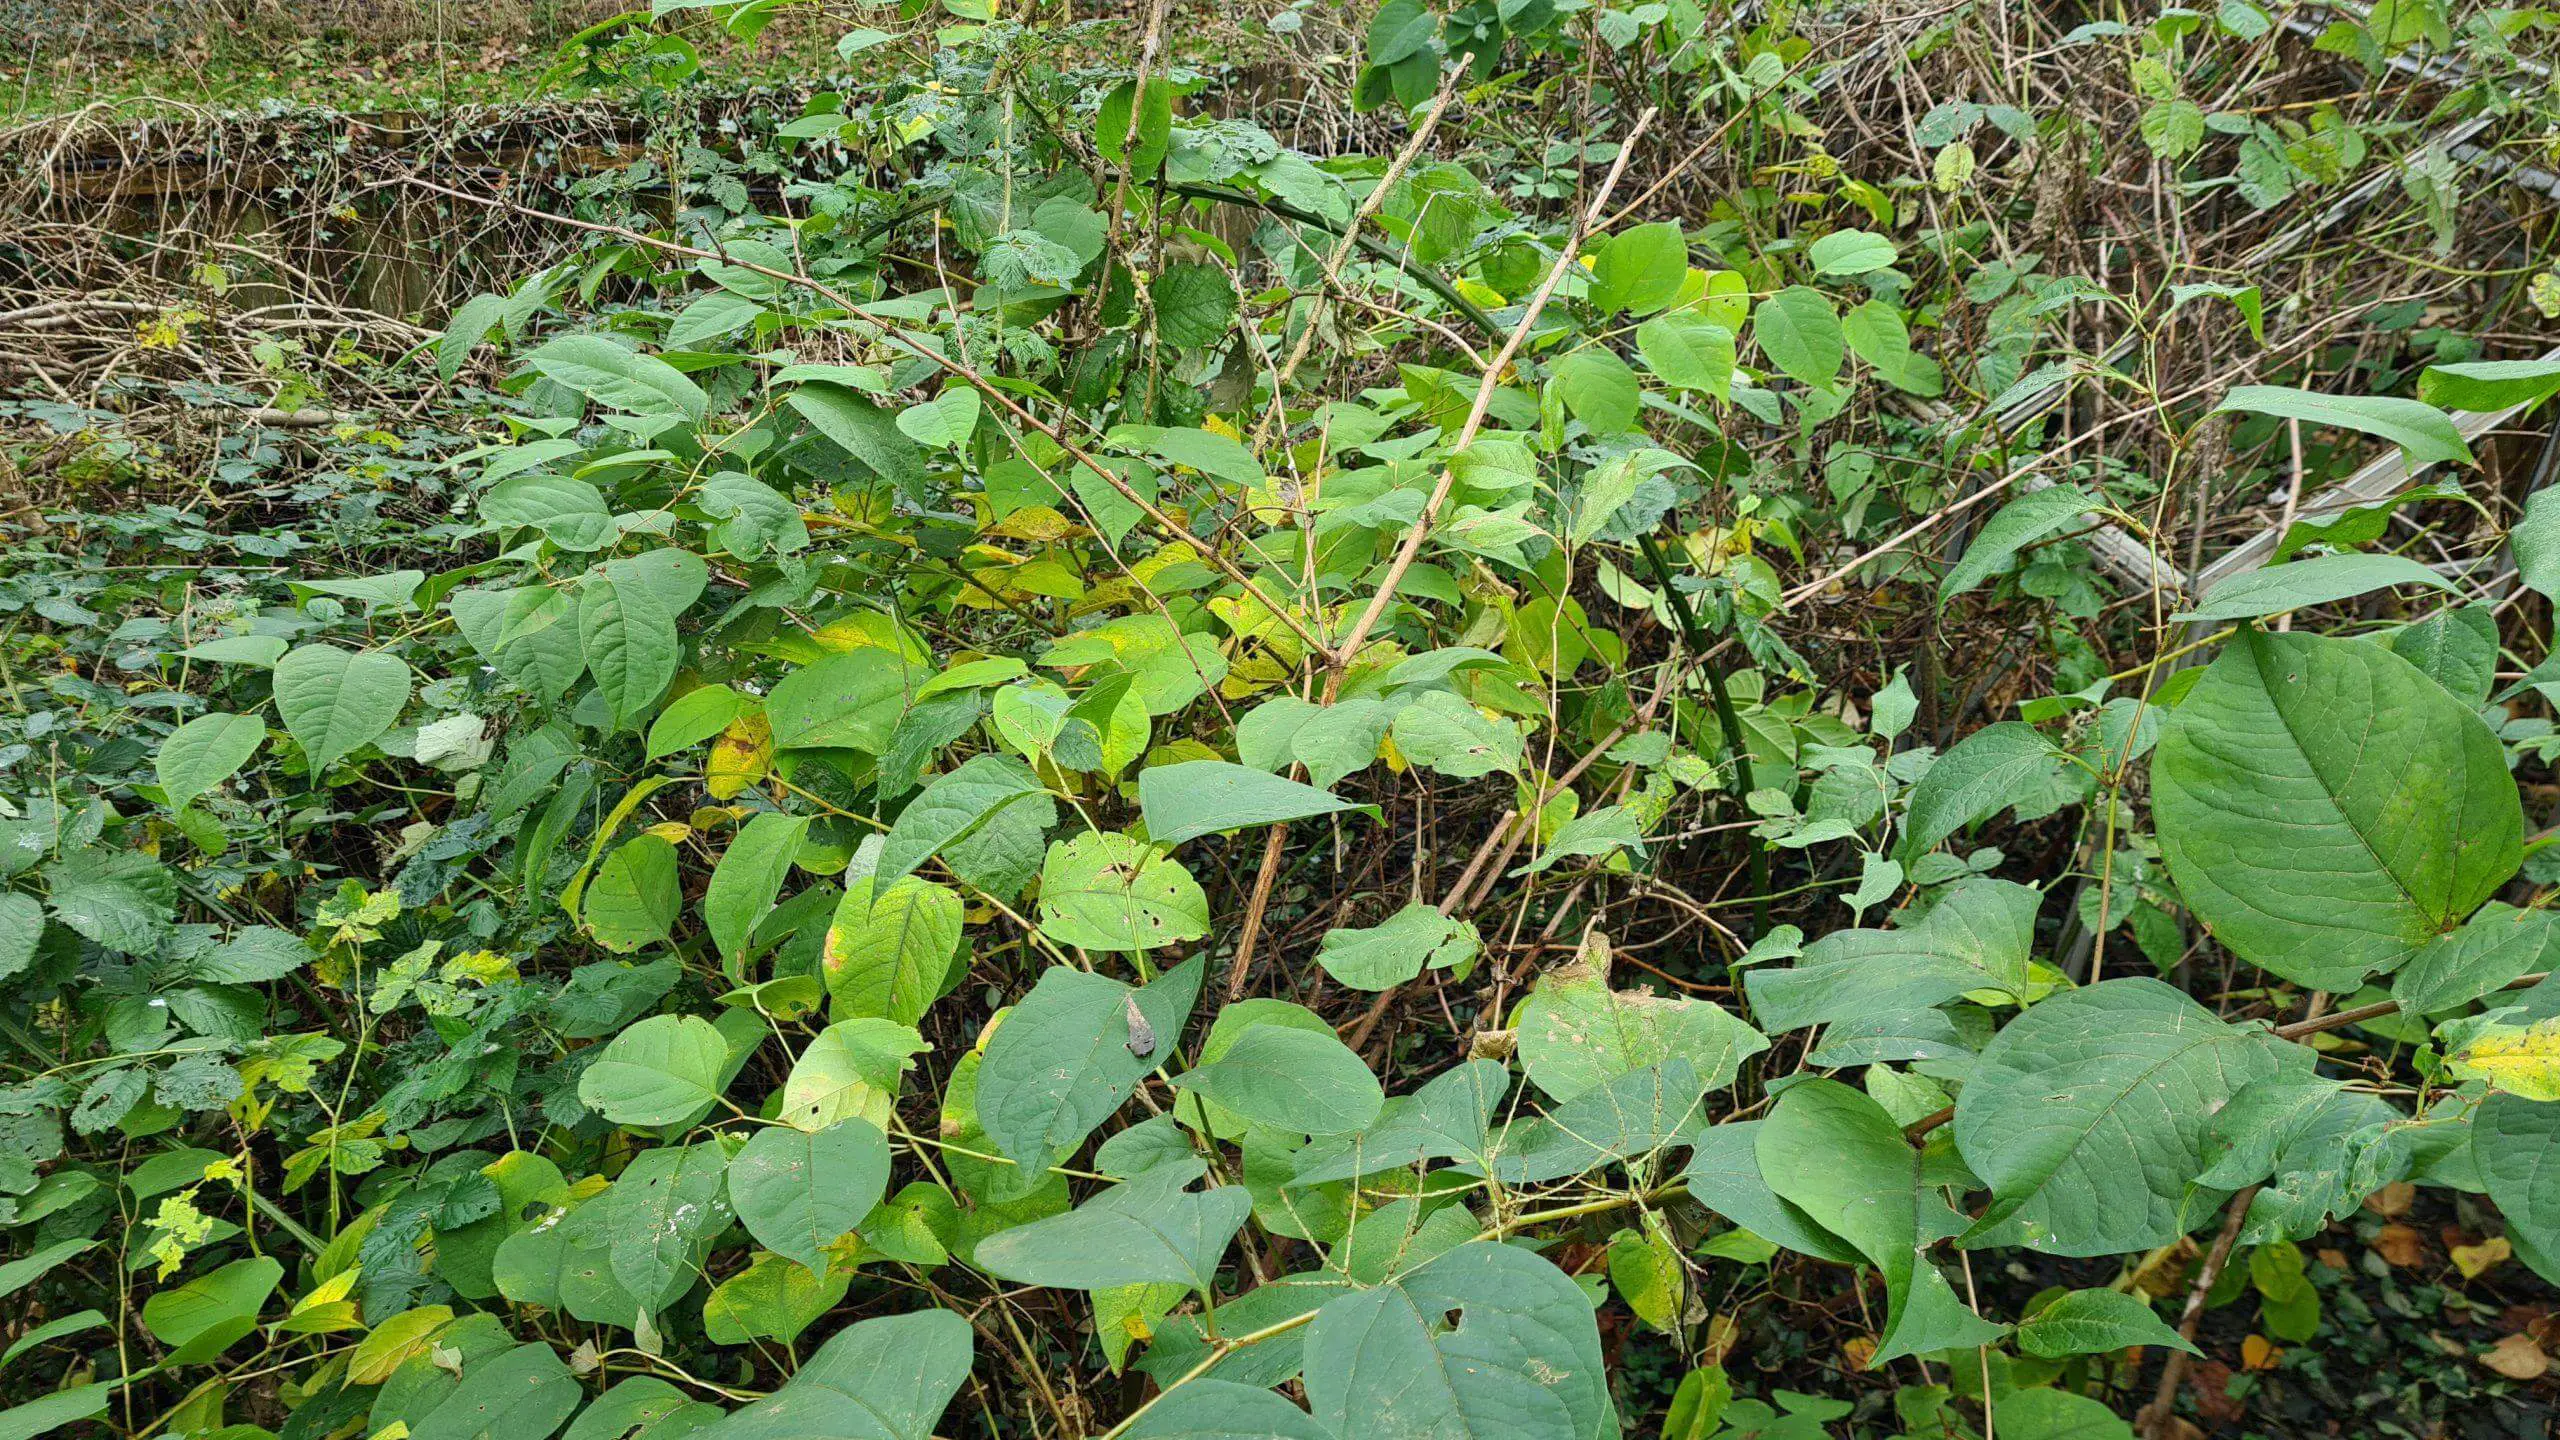 Eradicating Japanese knotweed from your property needs to be a priority in order to prevent it from being devalued